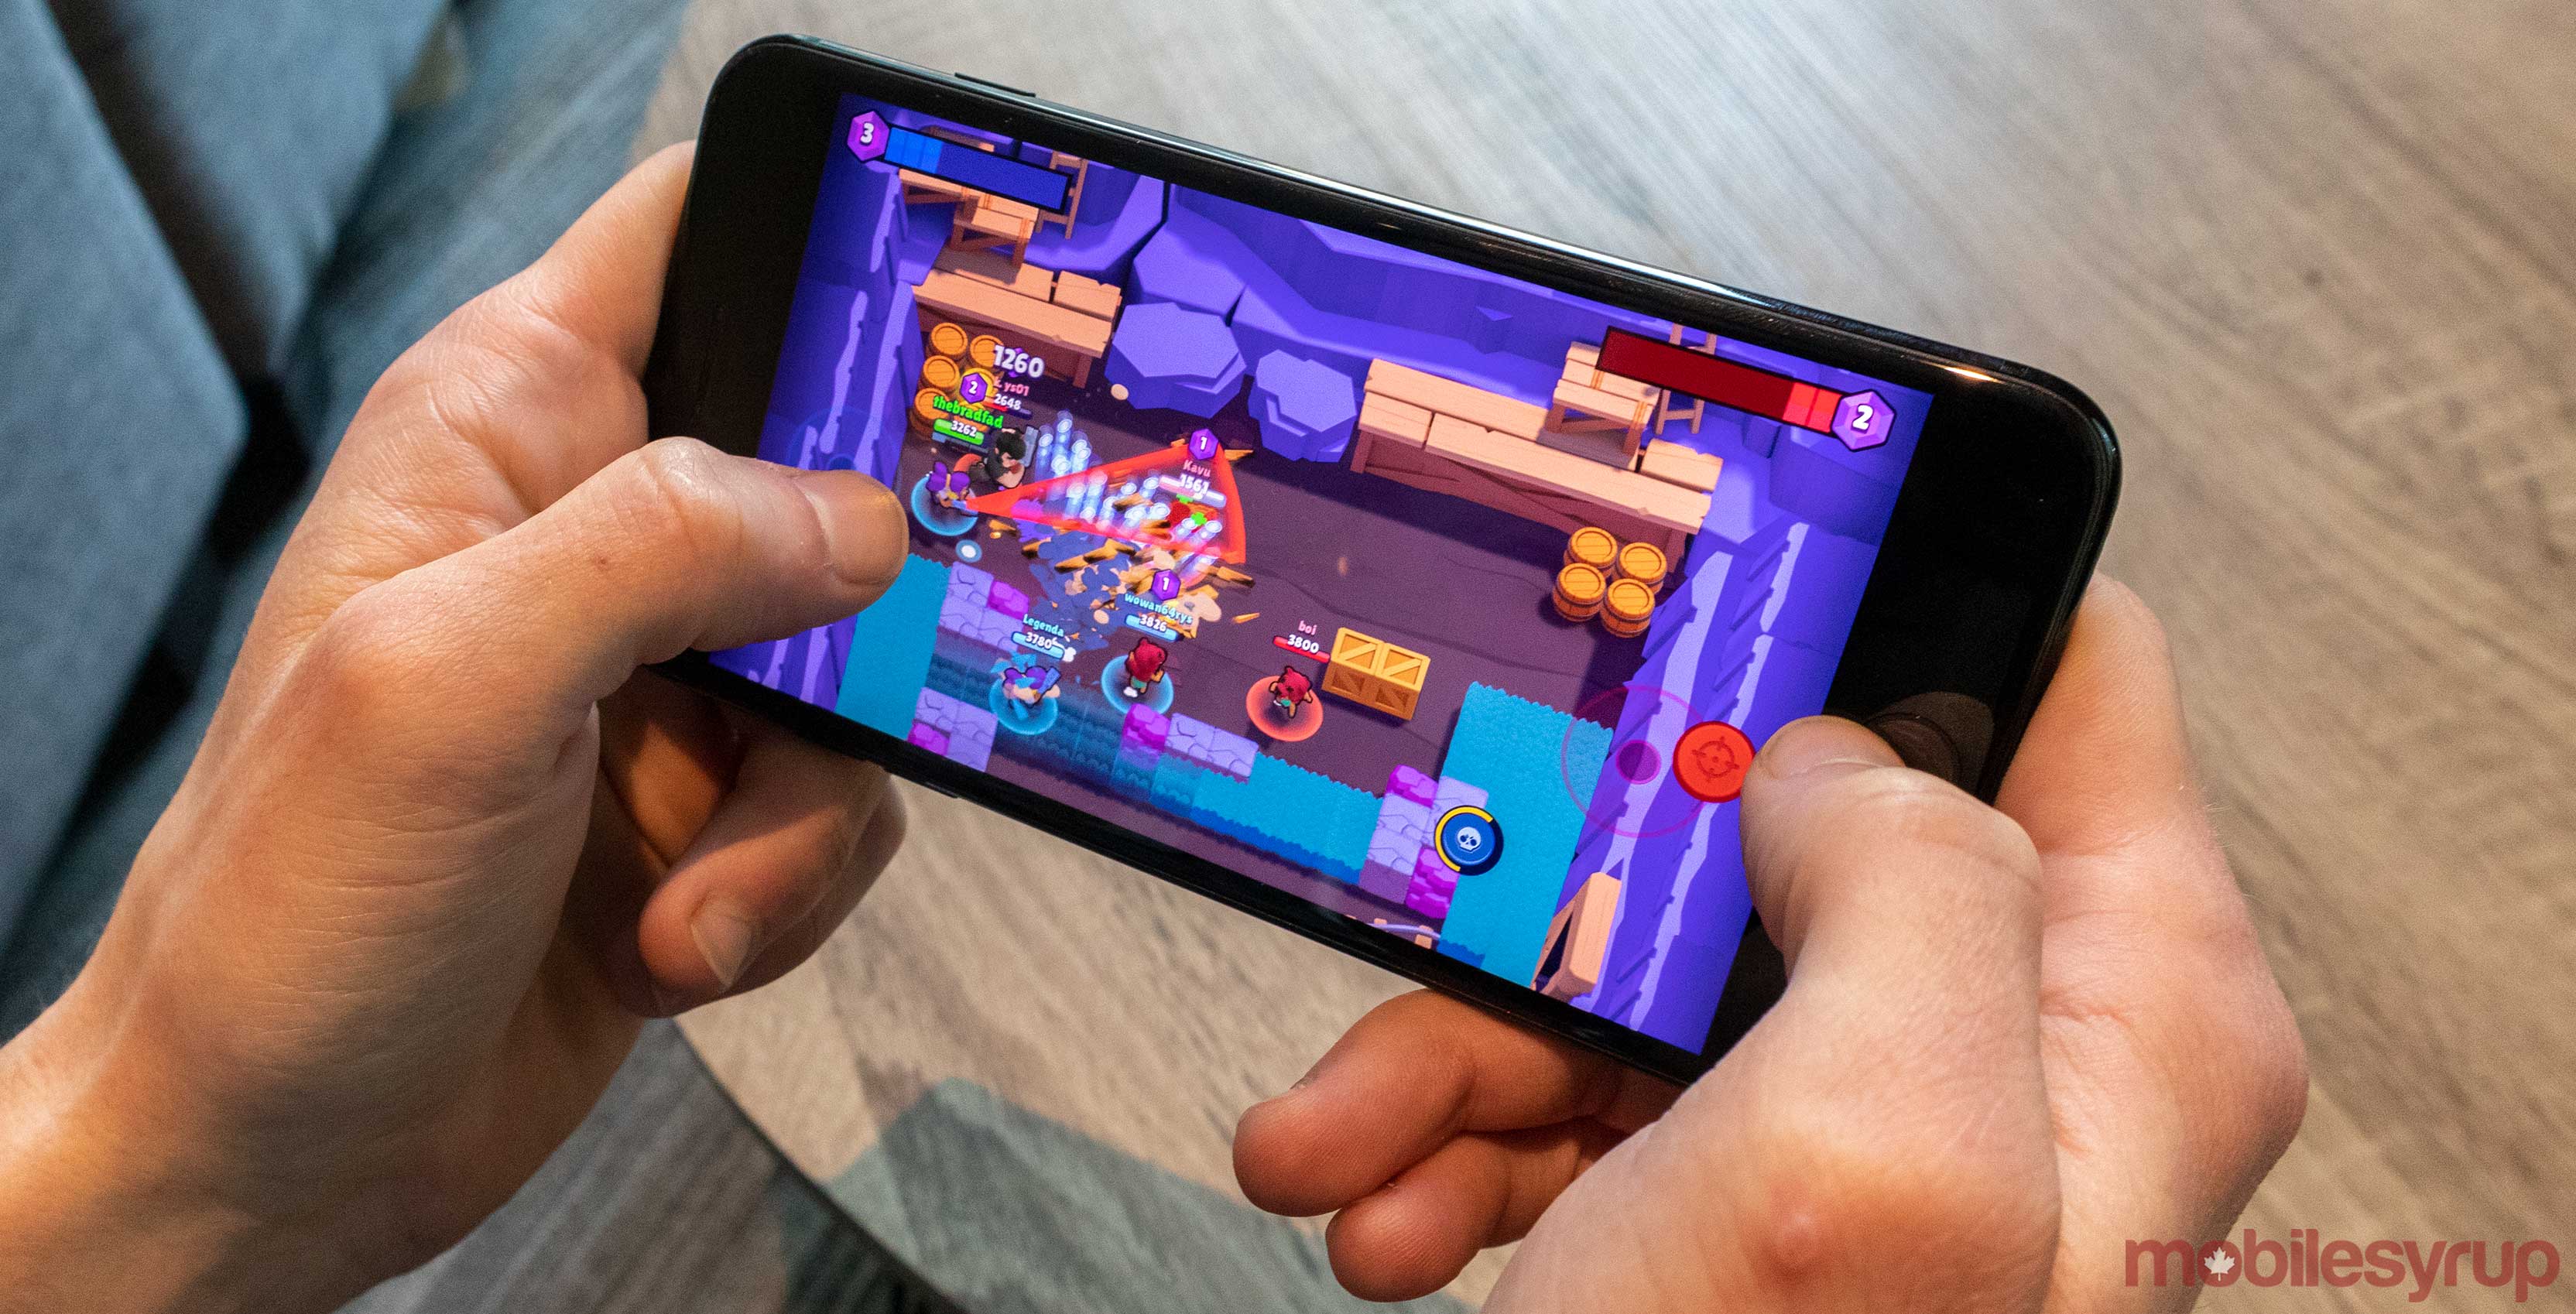 Brawl Stars Shows A Refreshing Amount Of Polish Game Of The Week